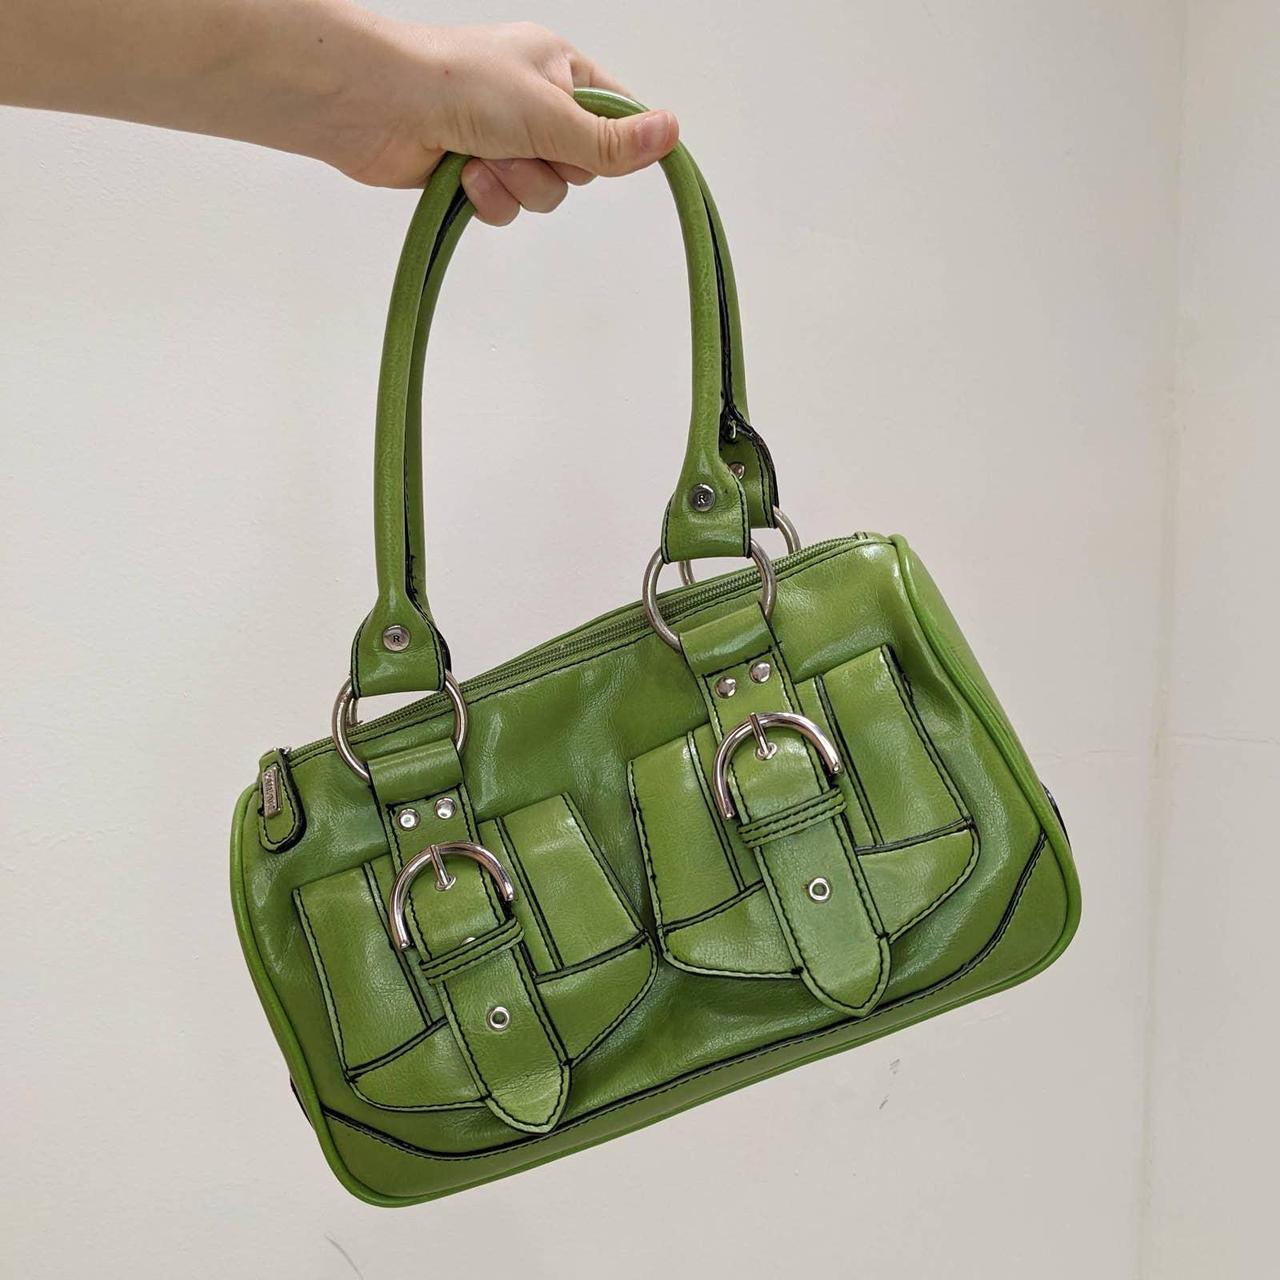 Product Image 2 - Y2K Rampage Green Hand Bag

-